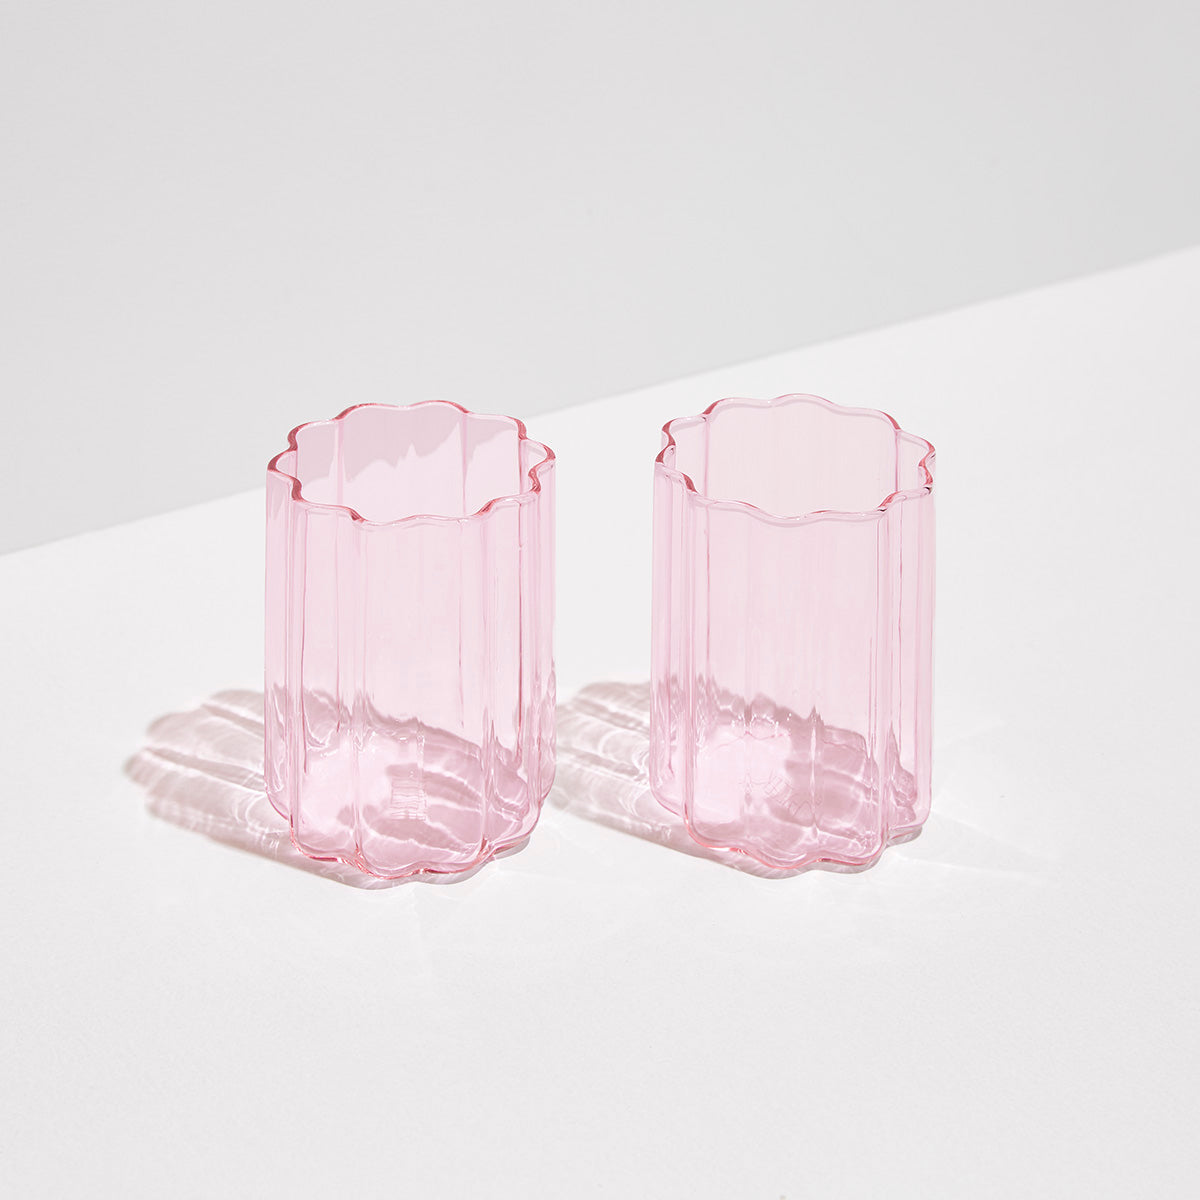 Wave Double Old Fashioned Glasses, Pink, Set of 2